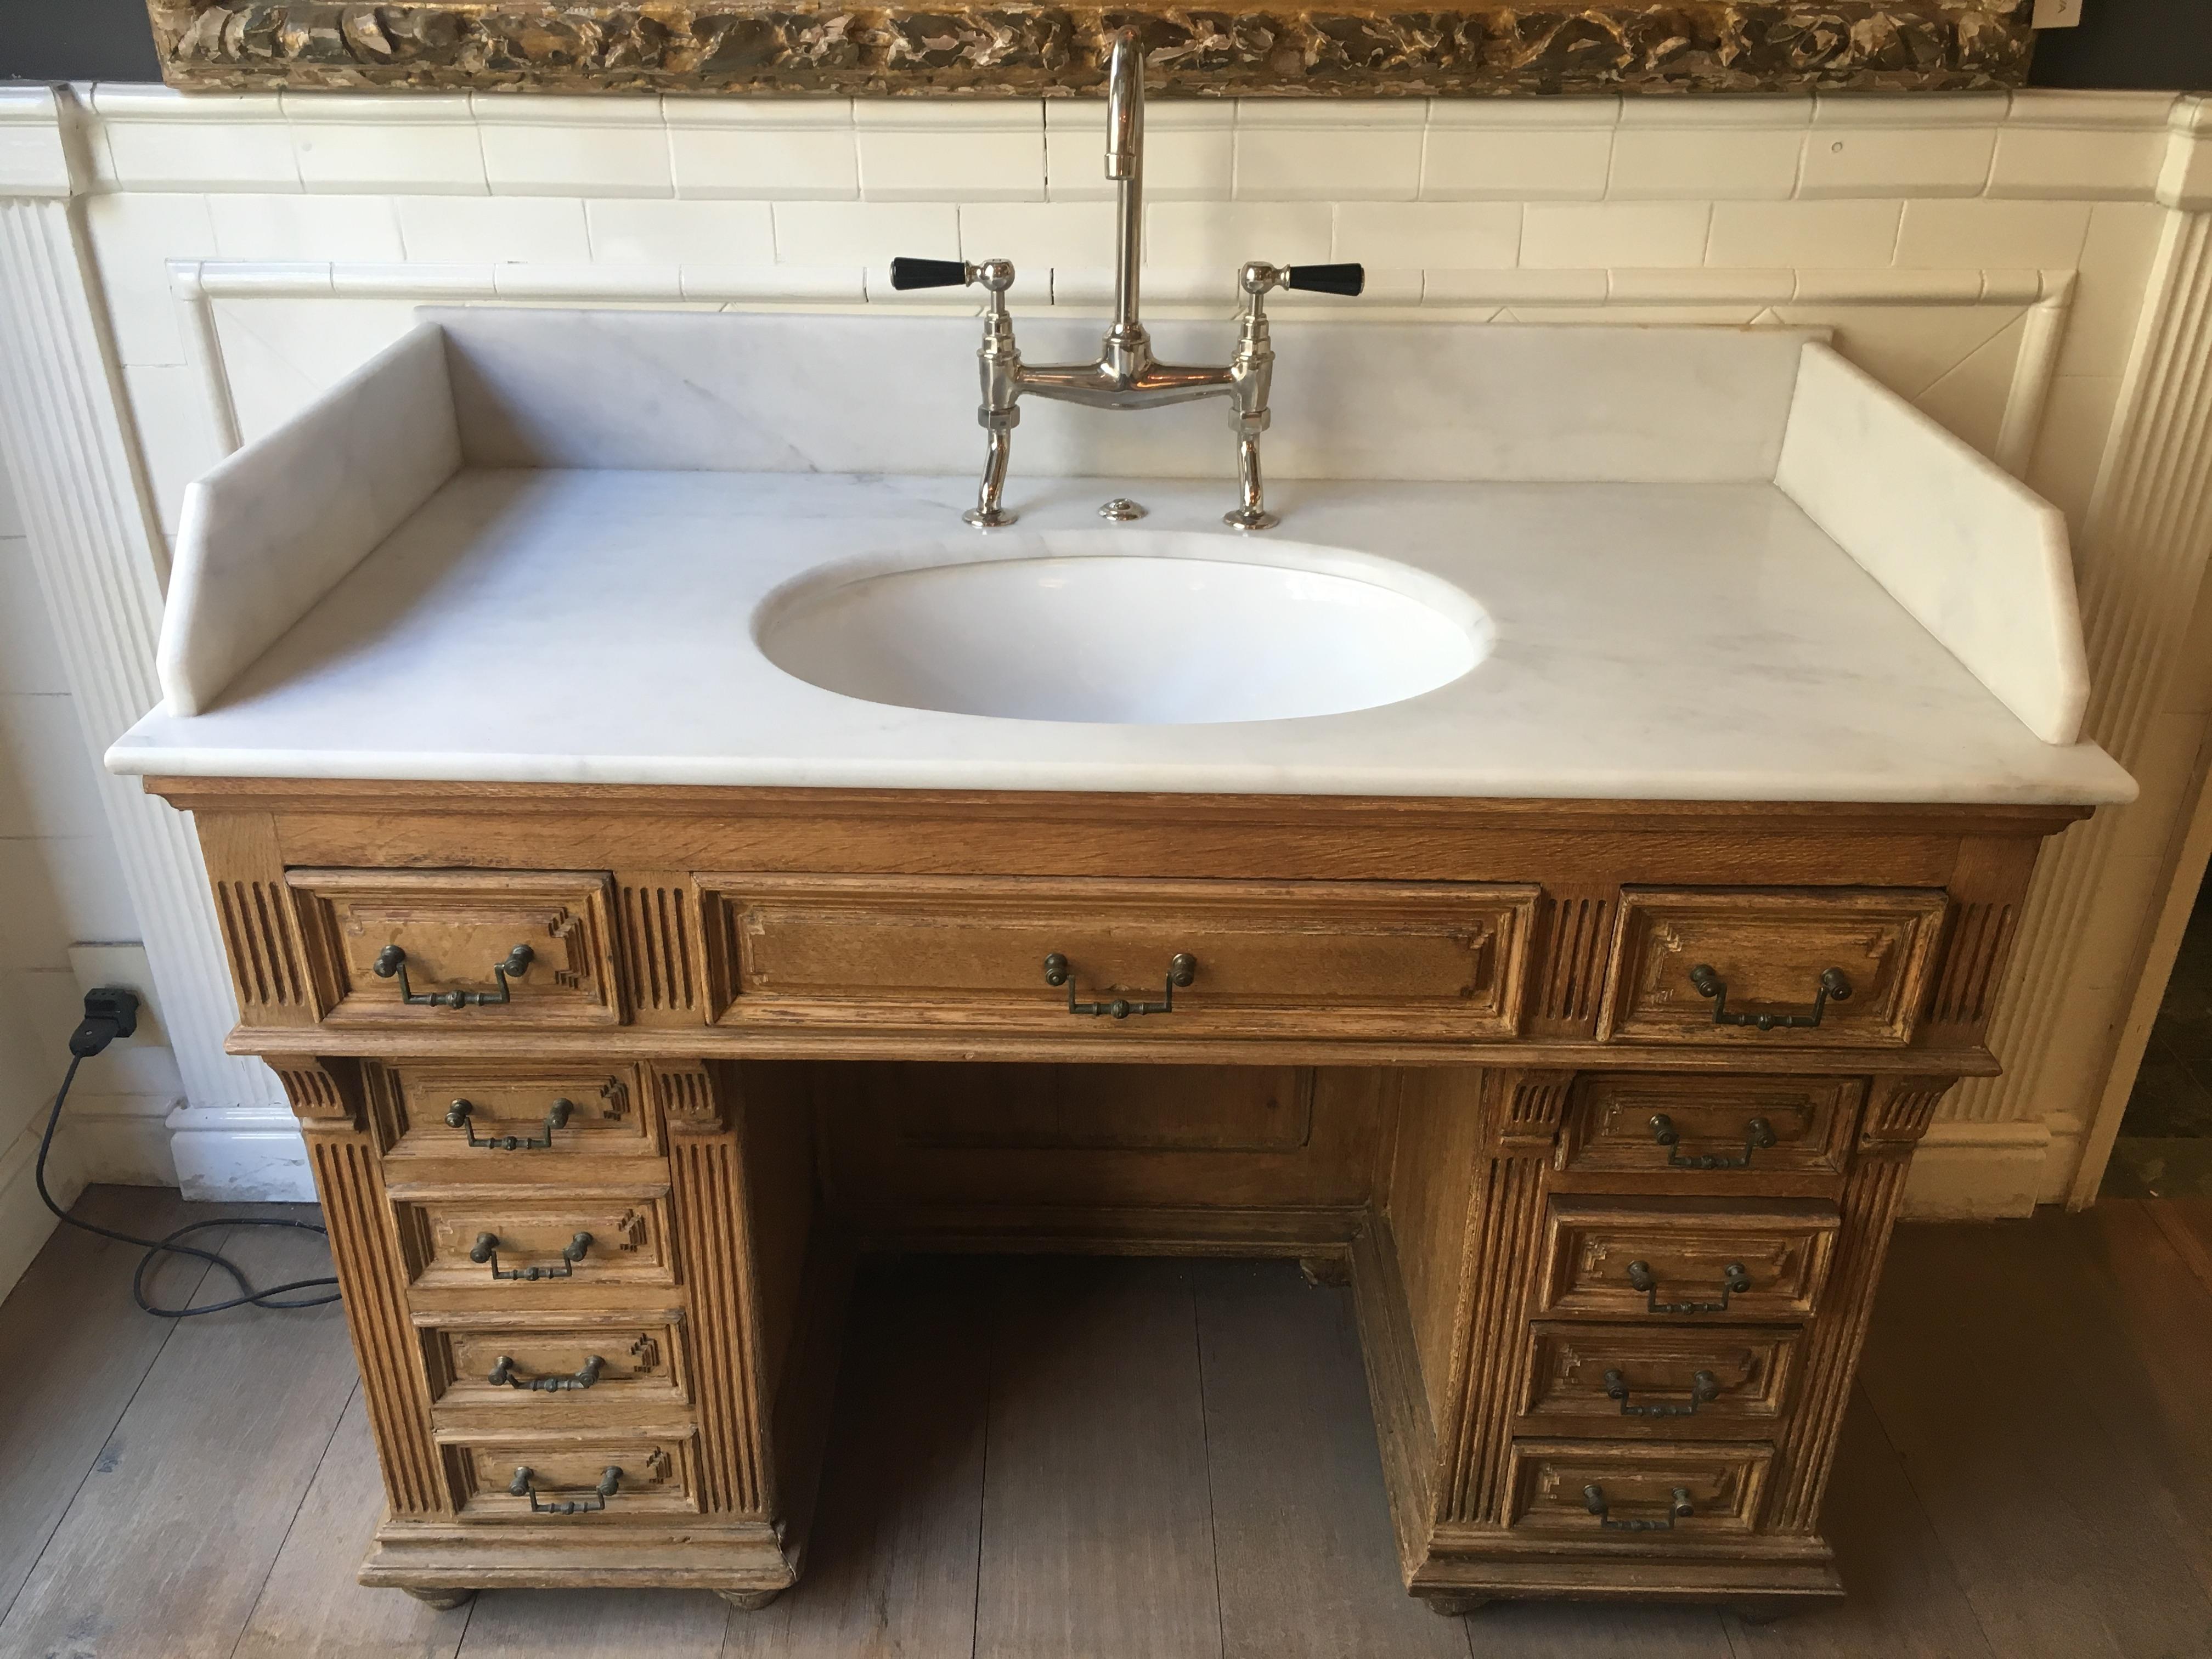 19th century French oak cupboard sink with drawers and Carrara marble top, 1890s.
Faucets not included.
Measures: Depth cm.60, width cm.120, height cm.82, total height cm.94.